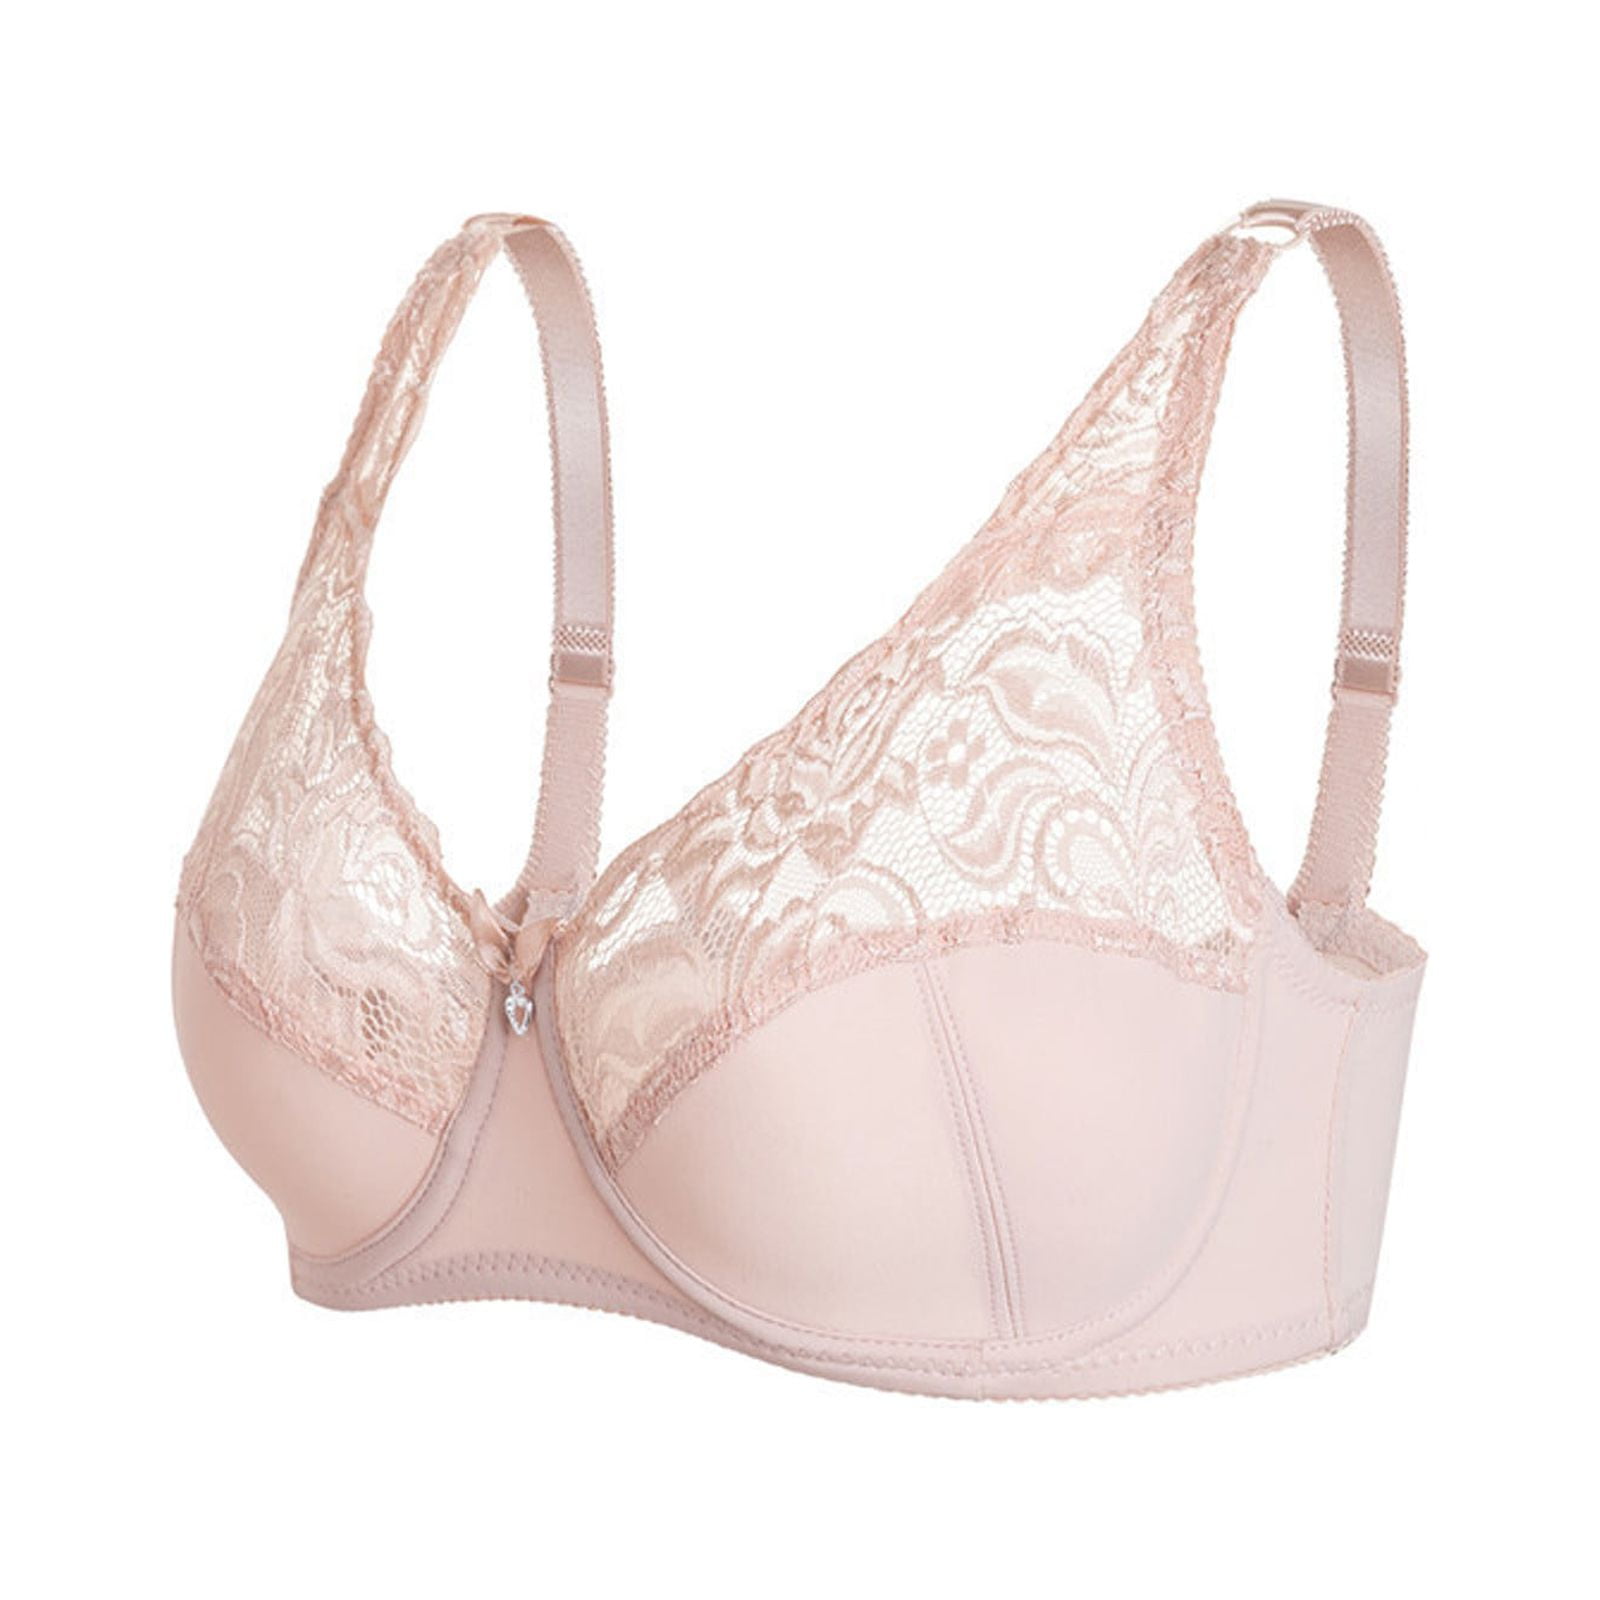 Shop Seelace Sheer Bralette - Floral Unlined Push Up With Underwire Support